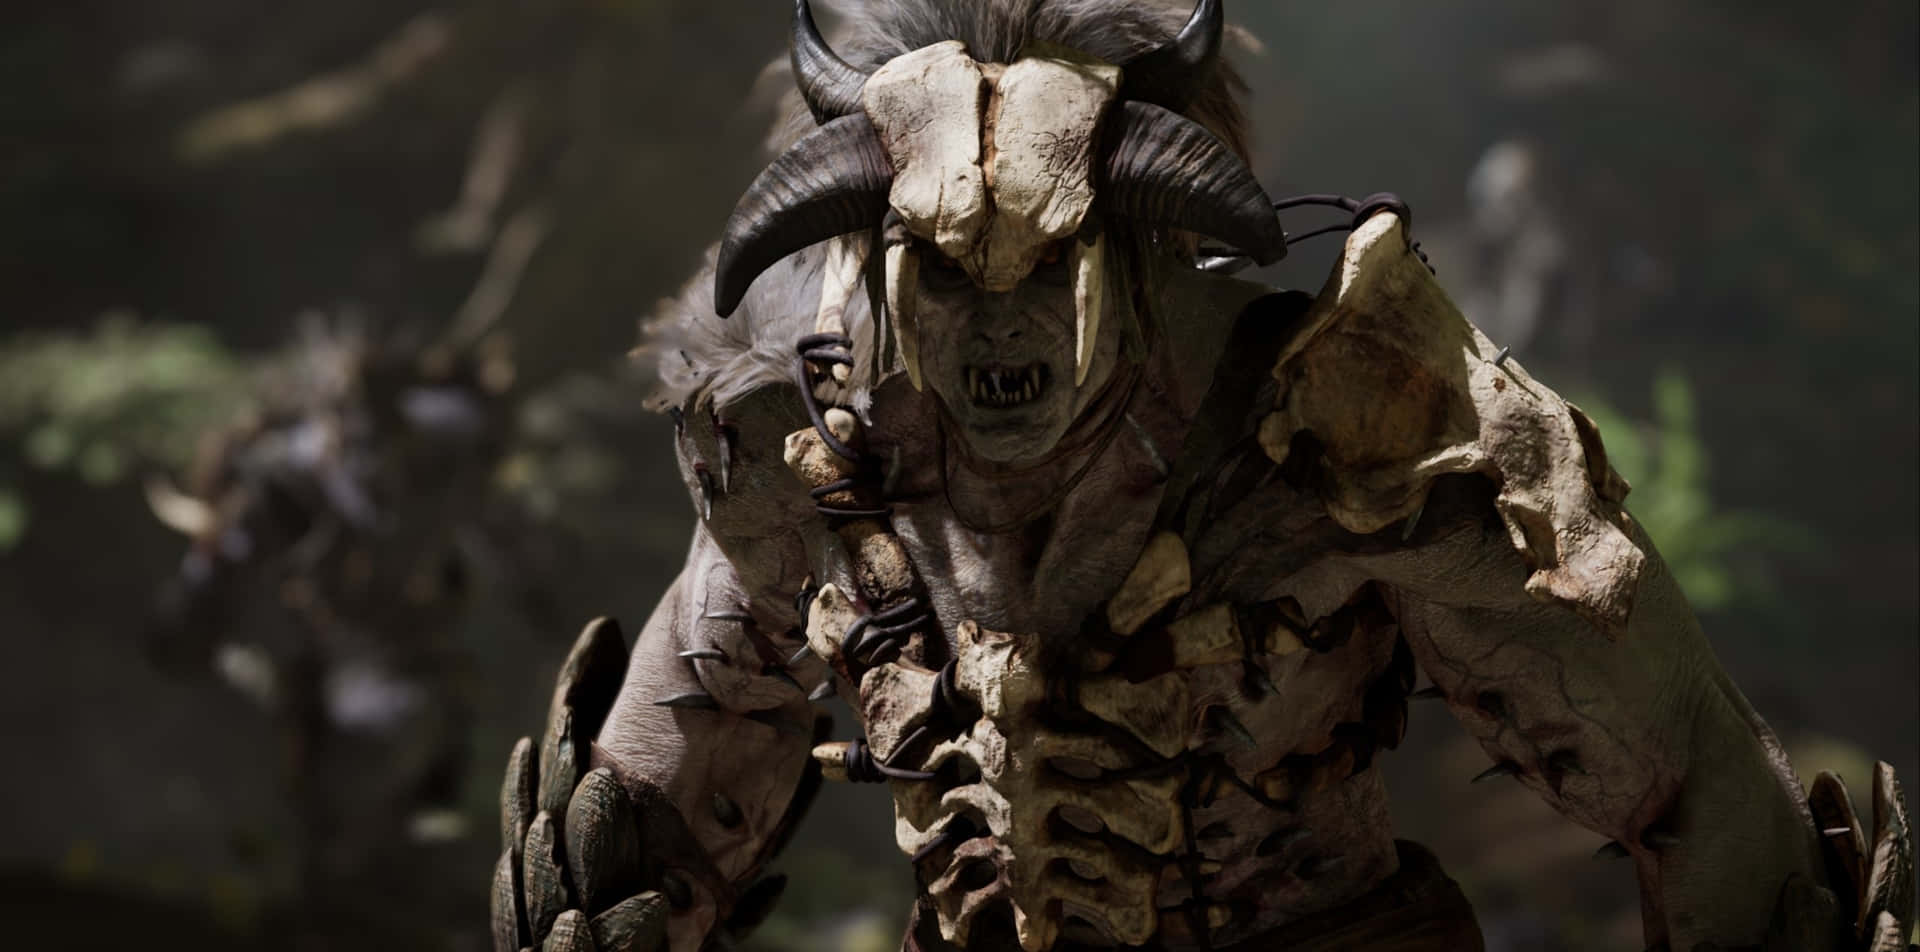 A Man With Horns And A Horned Head Is Walking Through The Woods Background